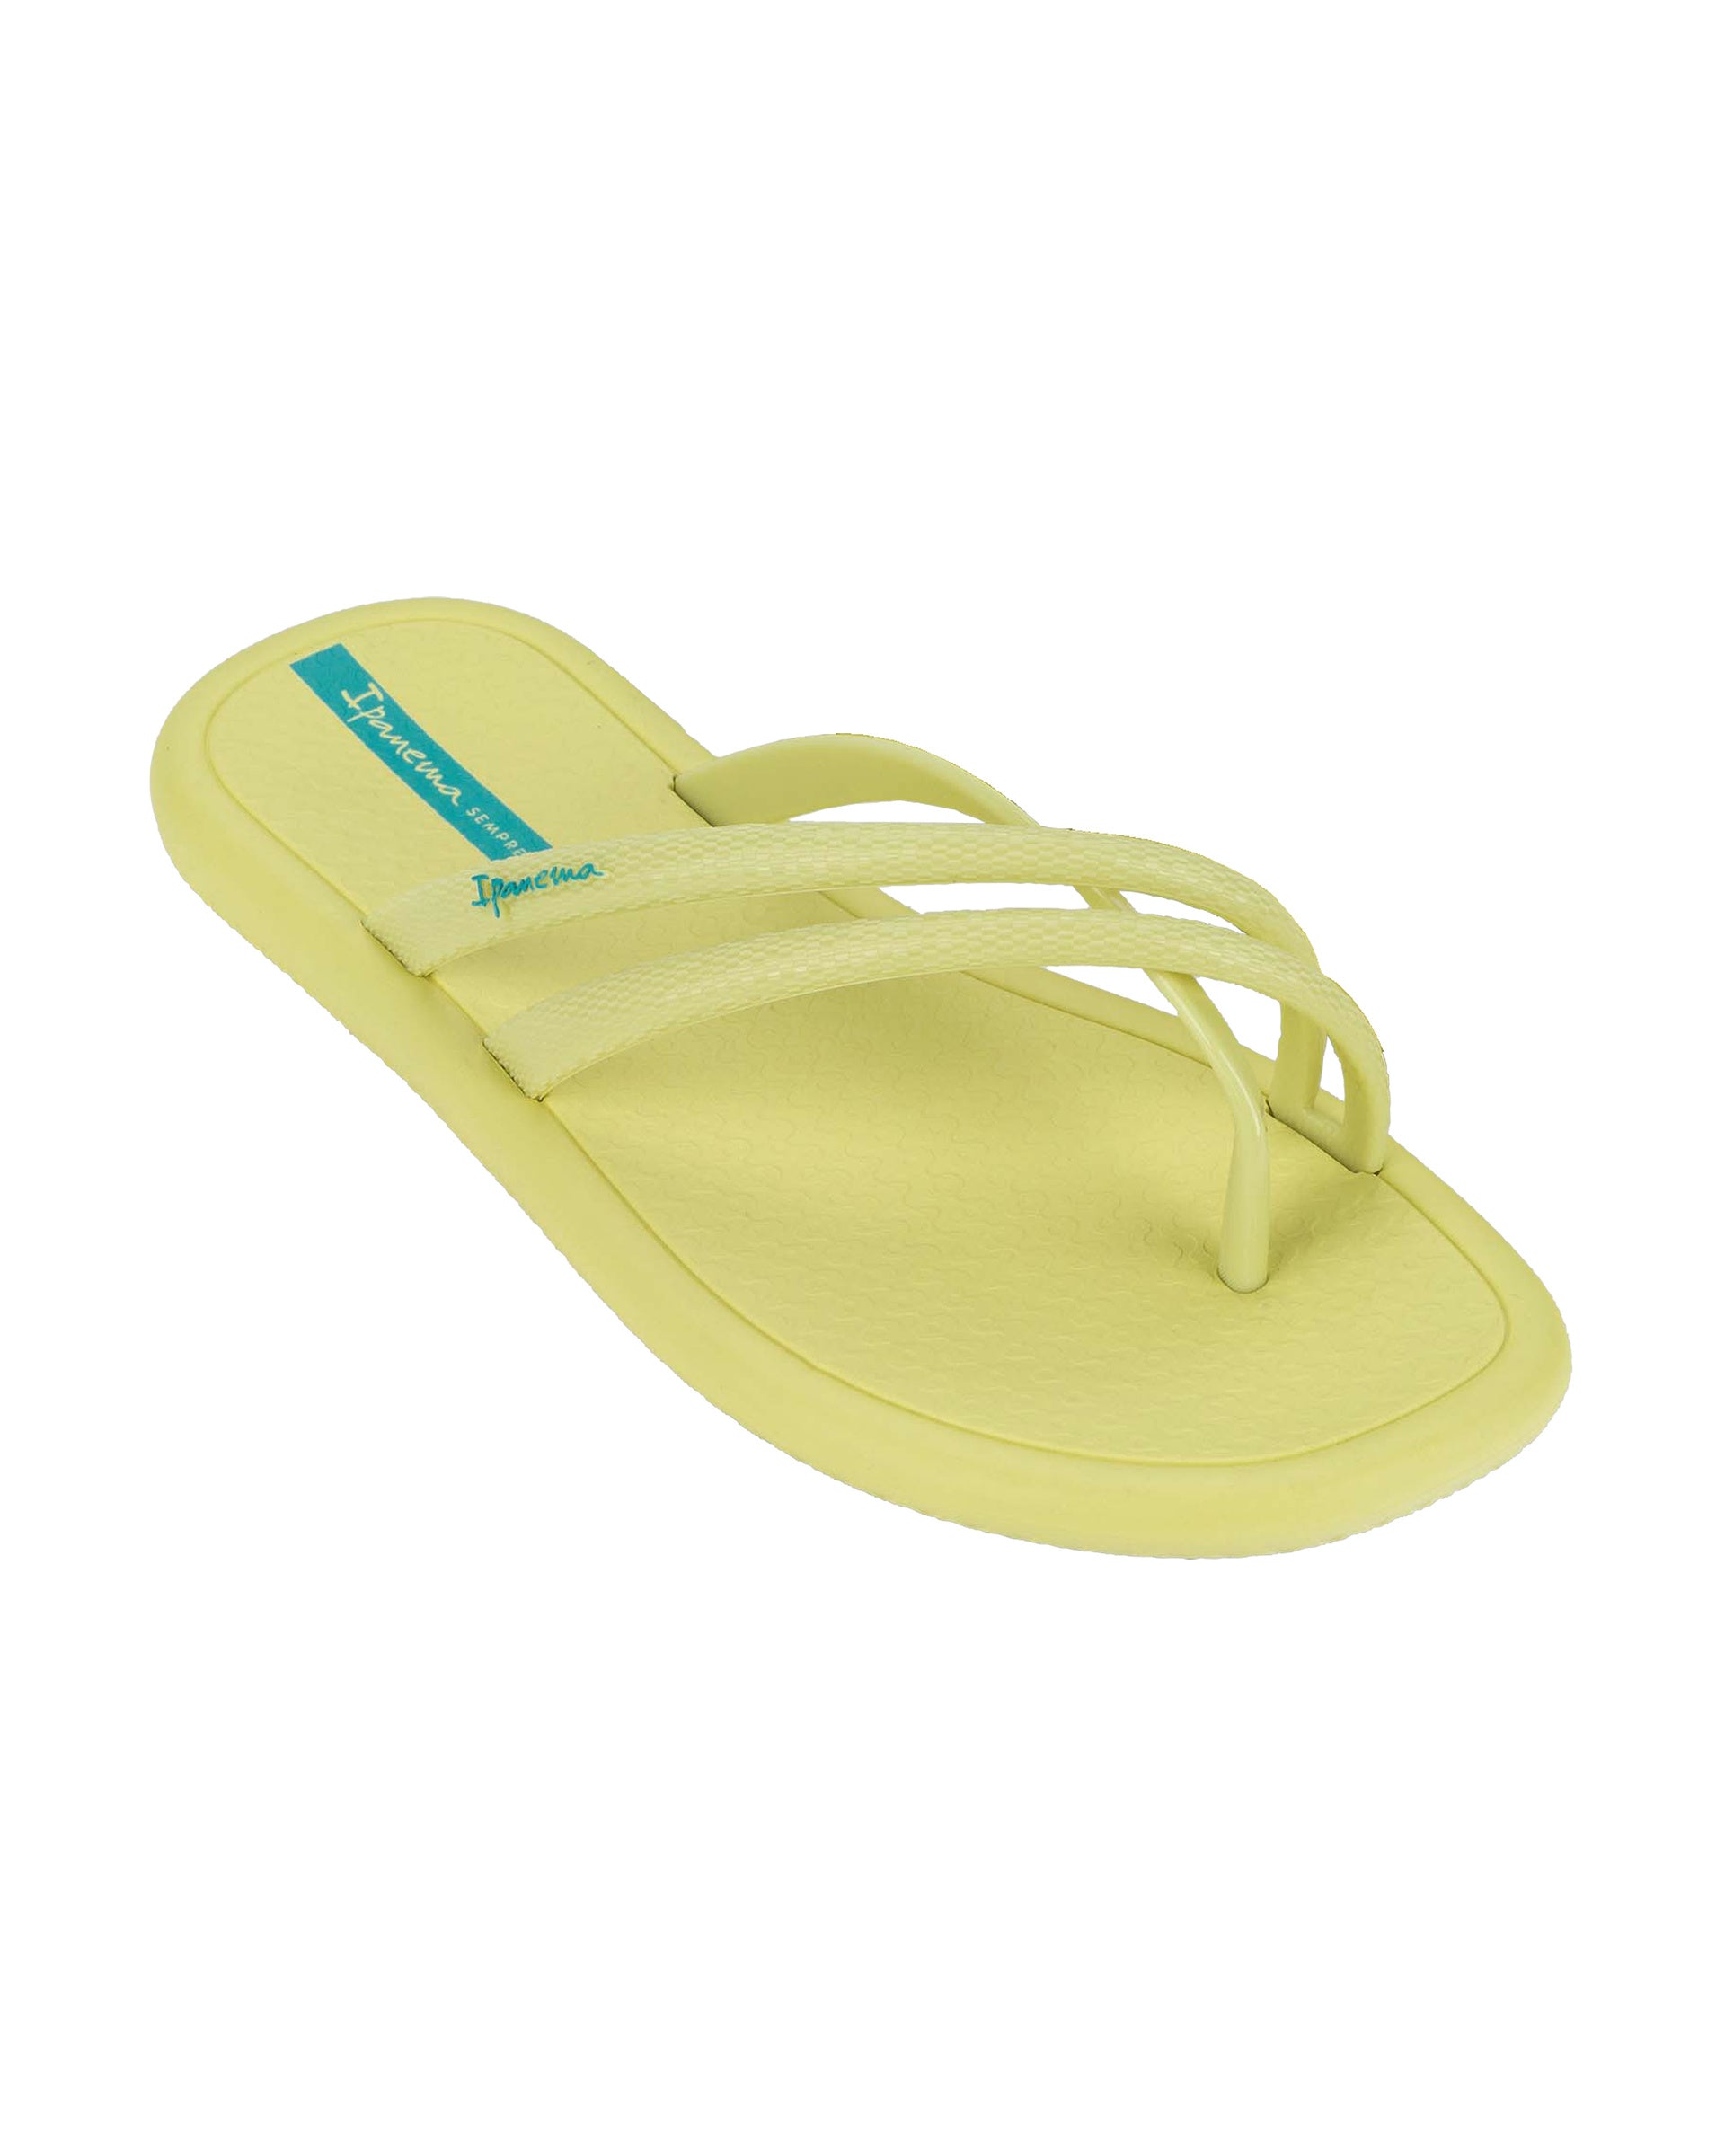 Angled view of a yellow Ipanema Meu Sol Rasteira women's flip flop with cross straps.